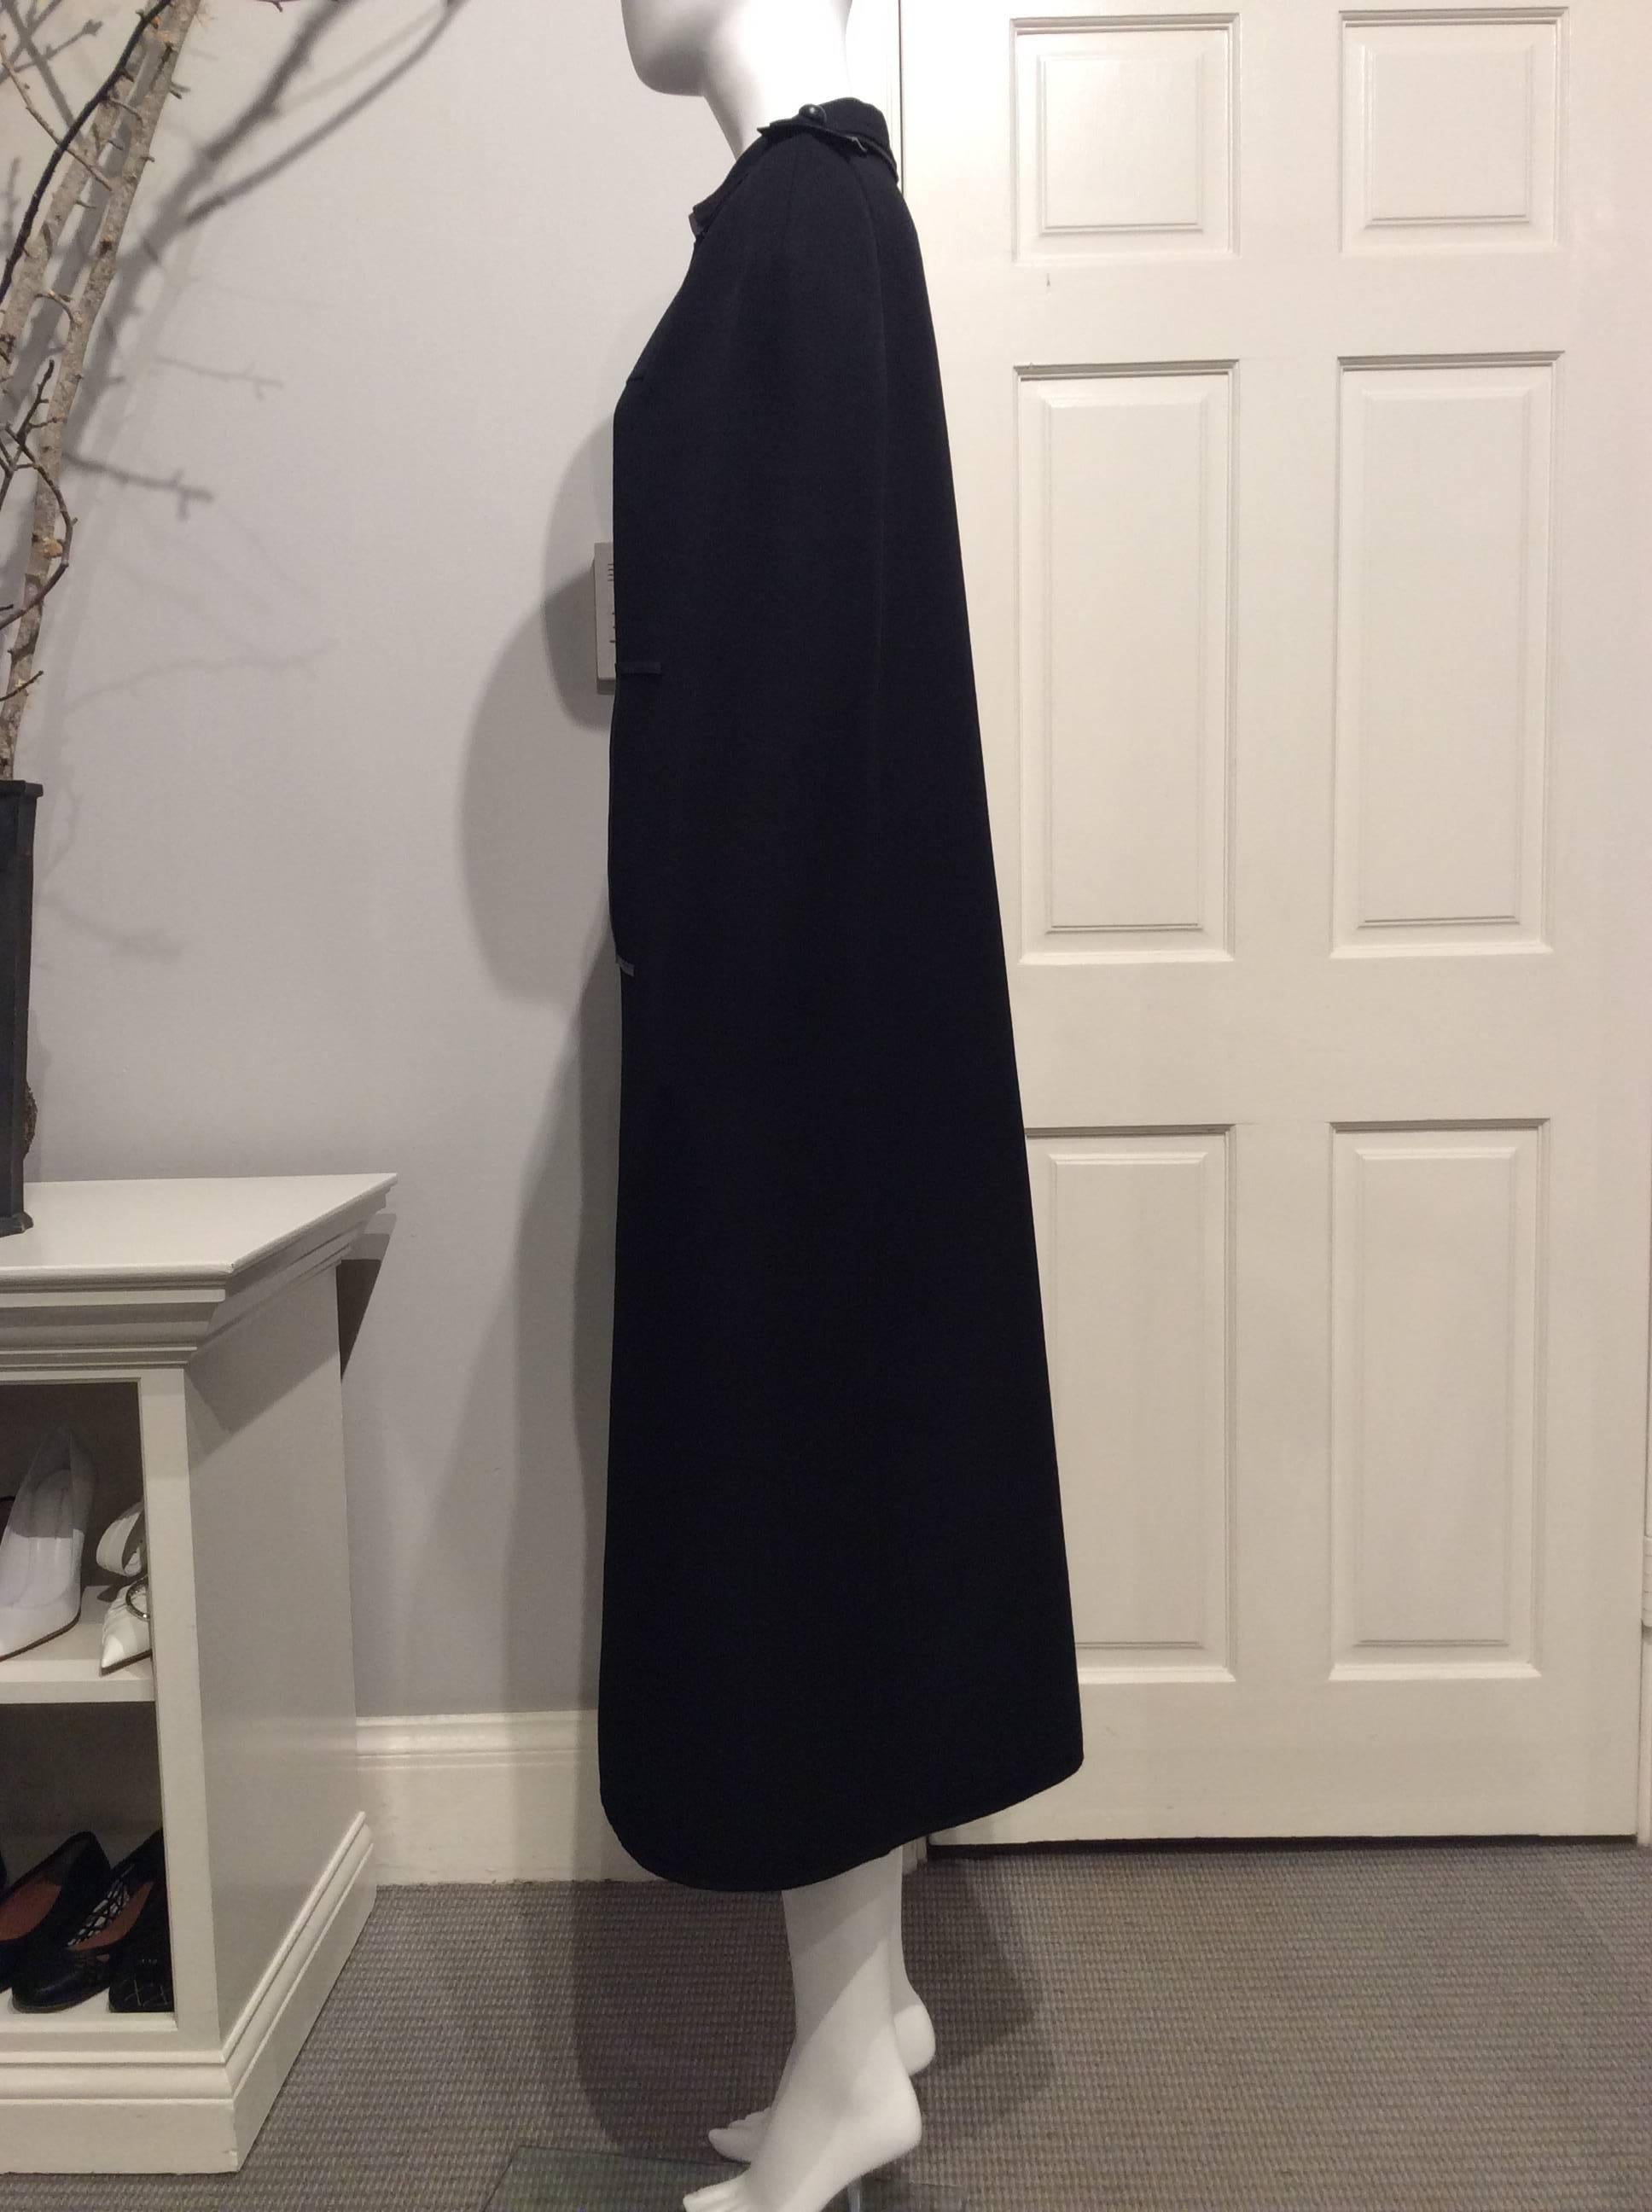 Long dramatic black Valentino wool cape with leather trimmed collar, mock pocket openings and epaulettes. The cape closes at the neck with two leather covered buttons on a silver chain. The item is brand new with tags showing the original price of